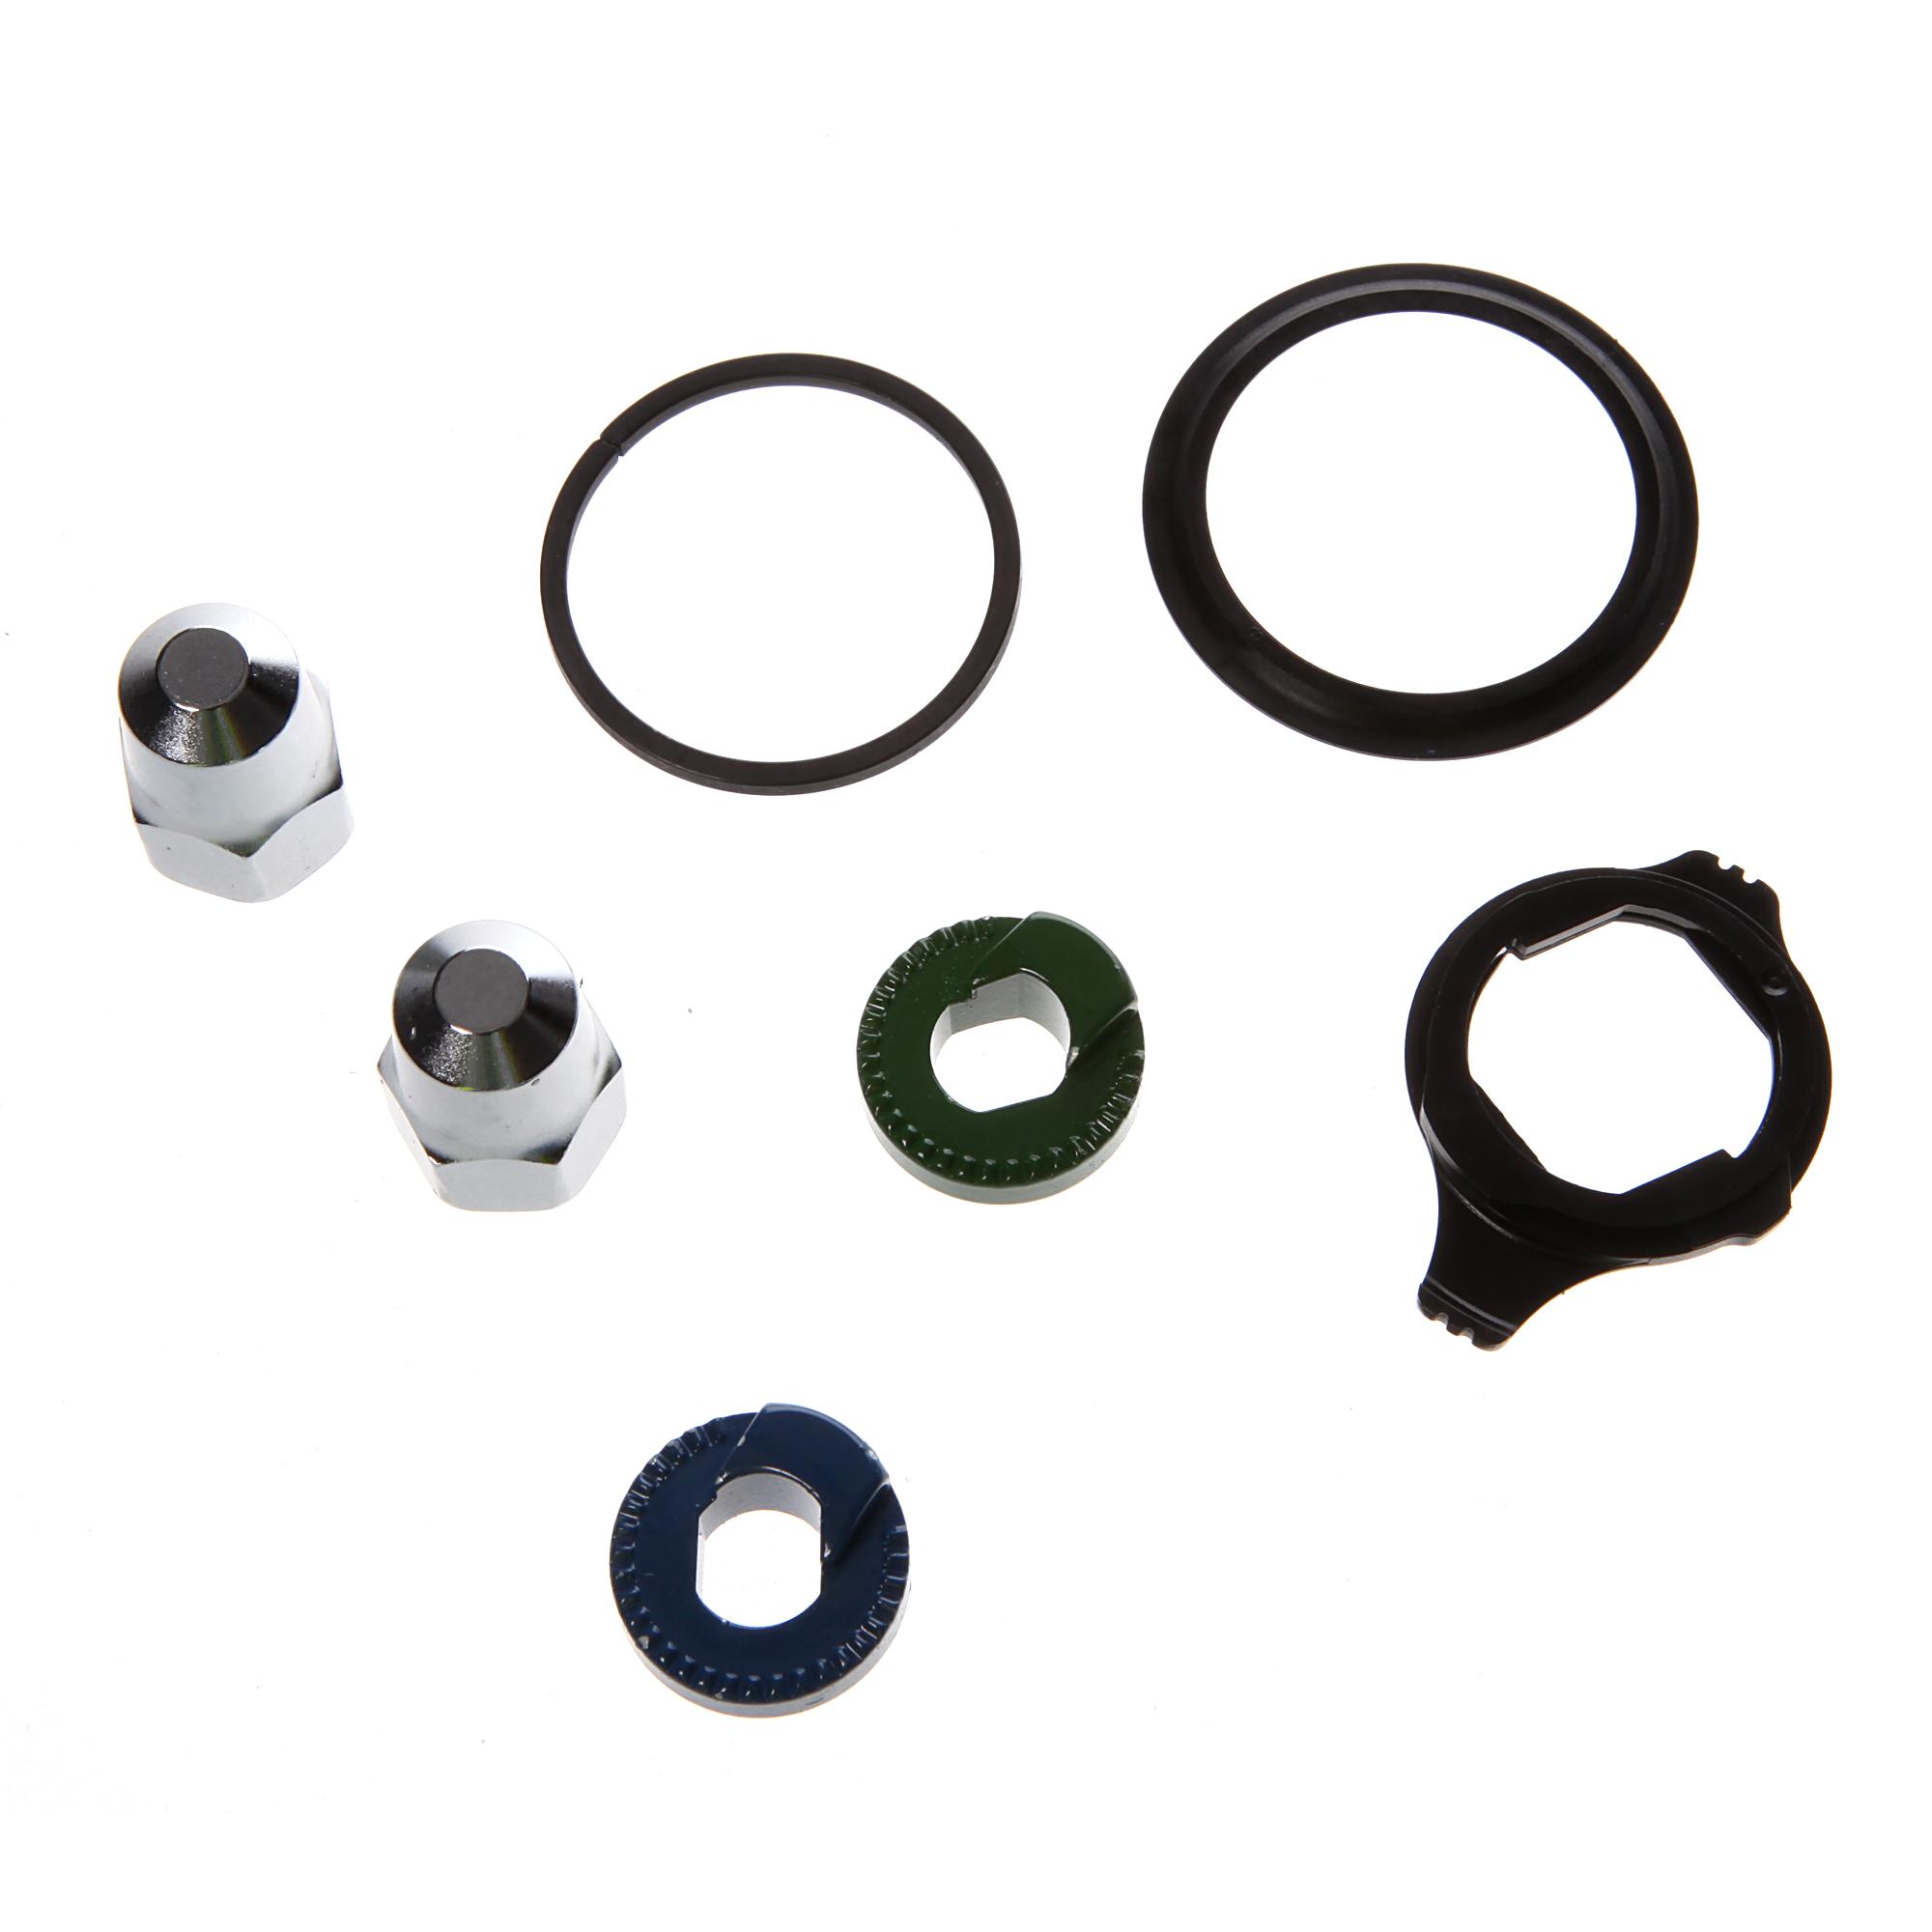 Shimano Alfine Cassette Joint And Fitting Kit - Black